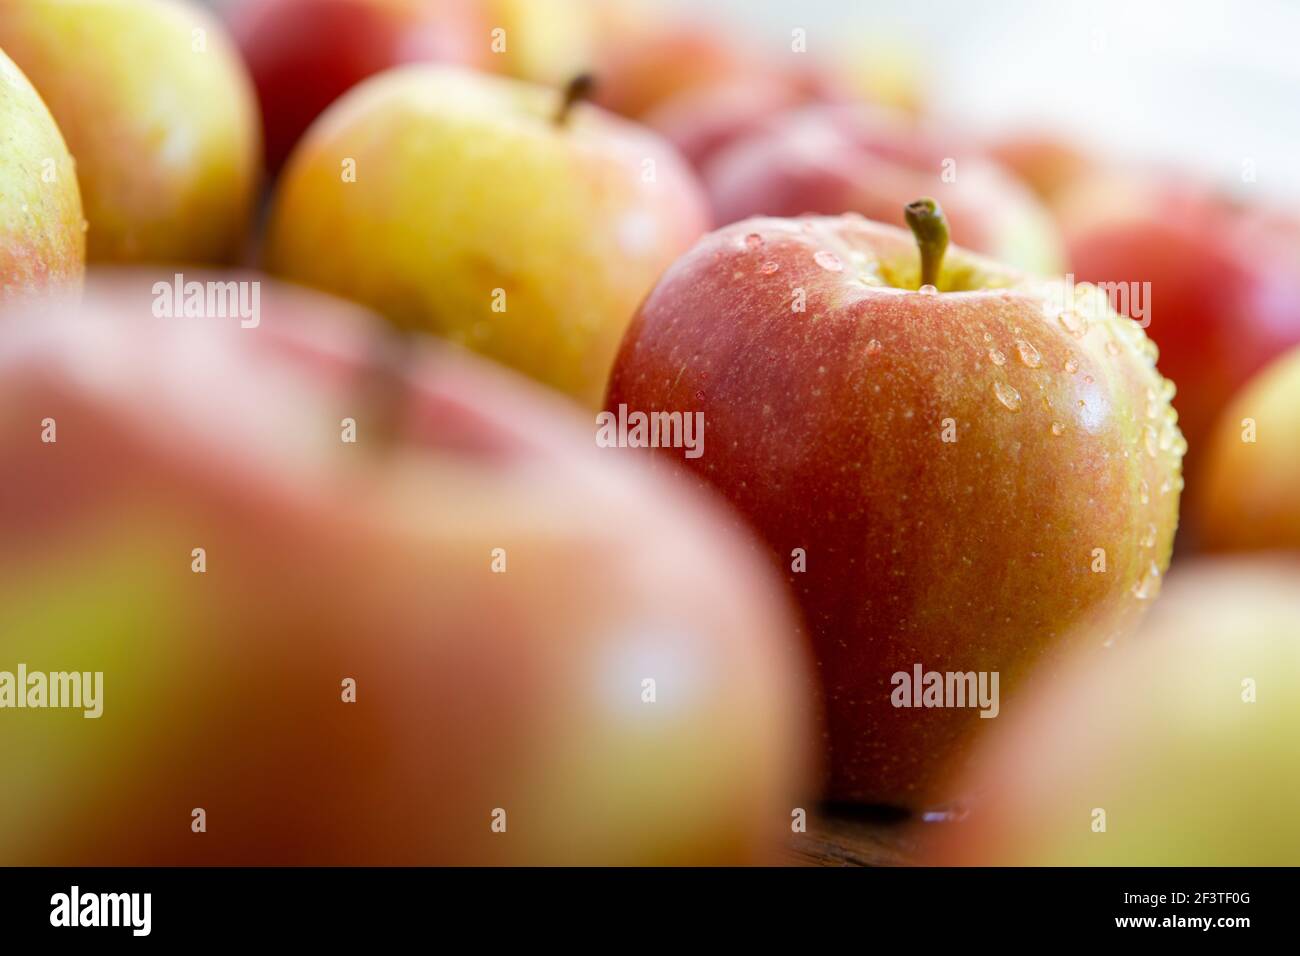 Apples shot on a wooden background with a summery feel. Stock Photo